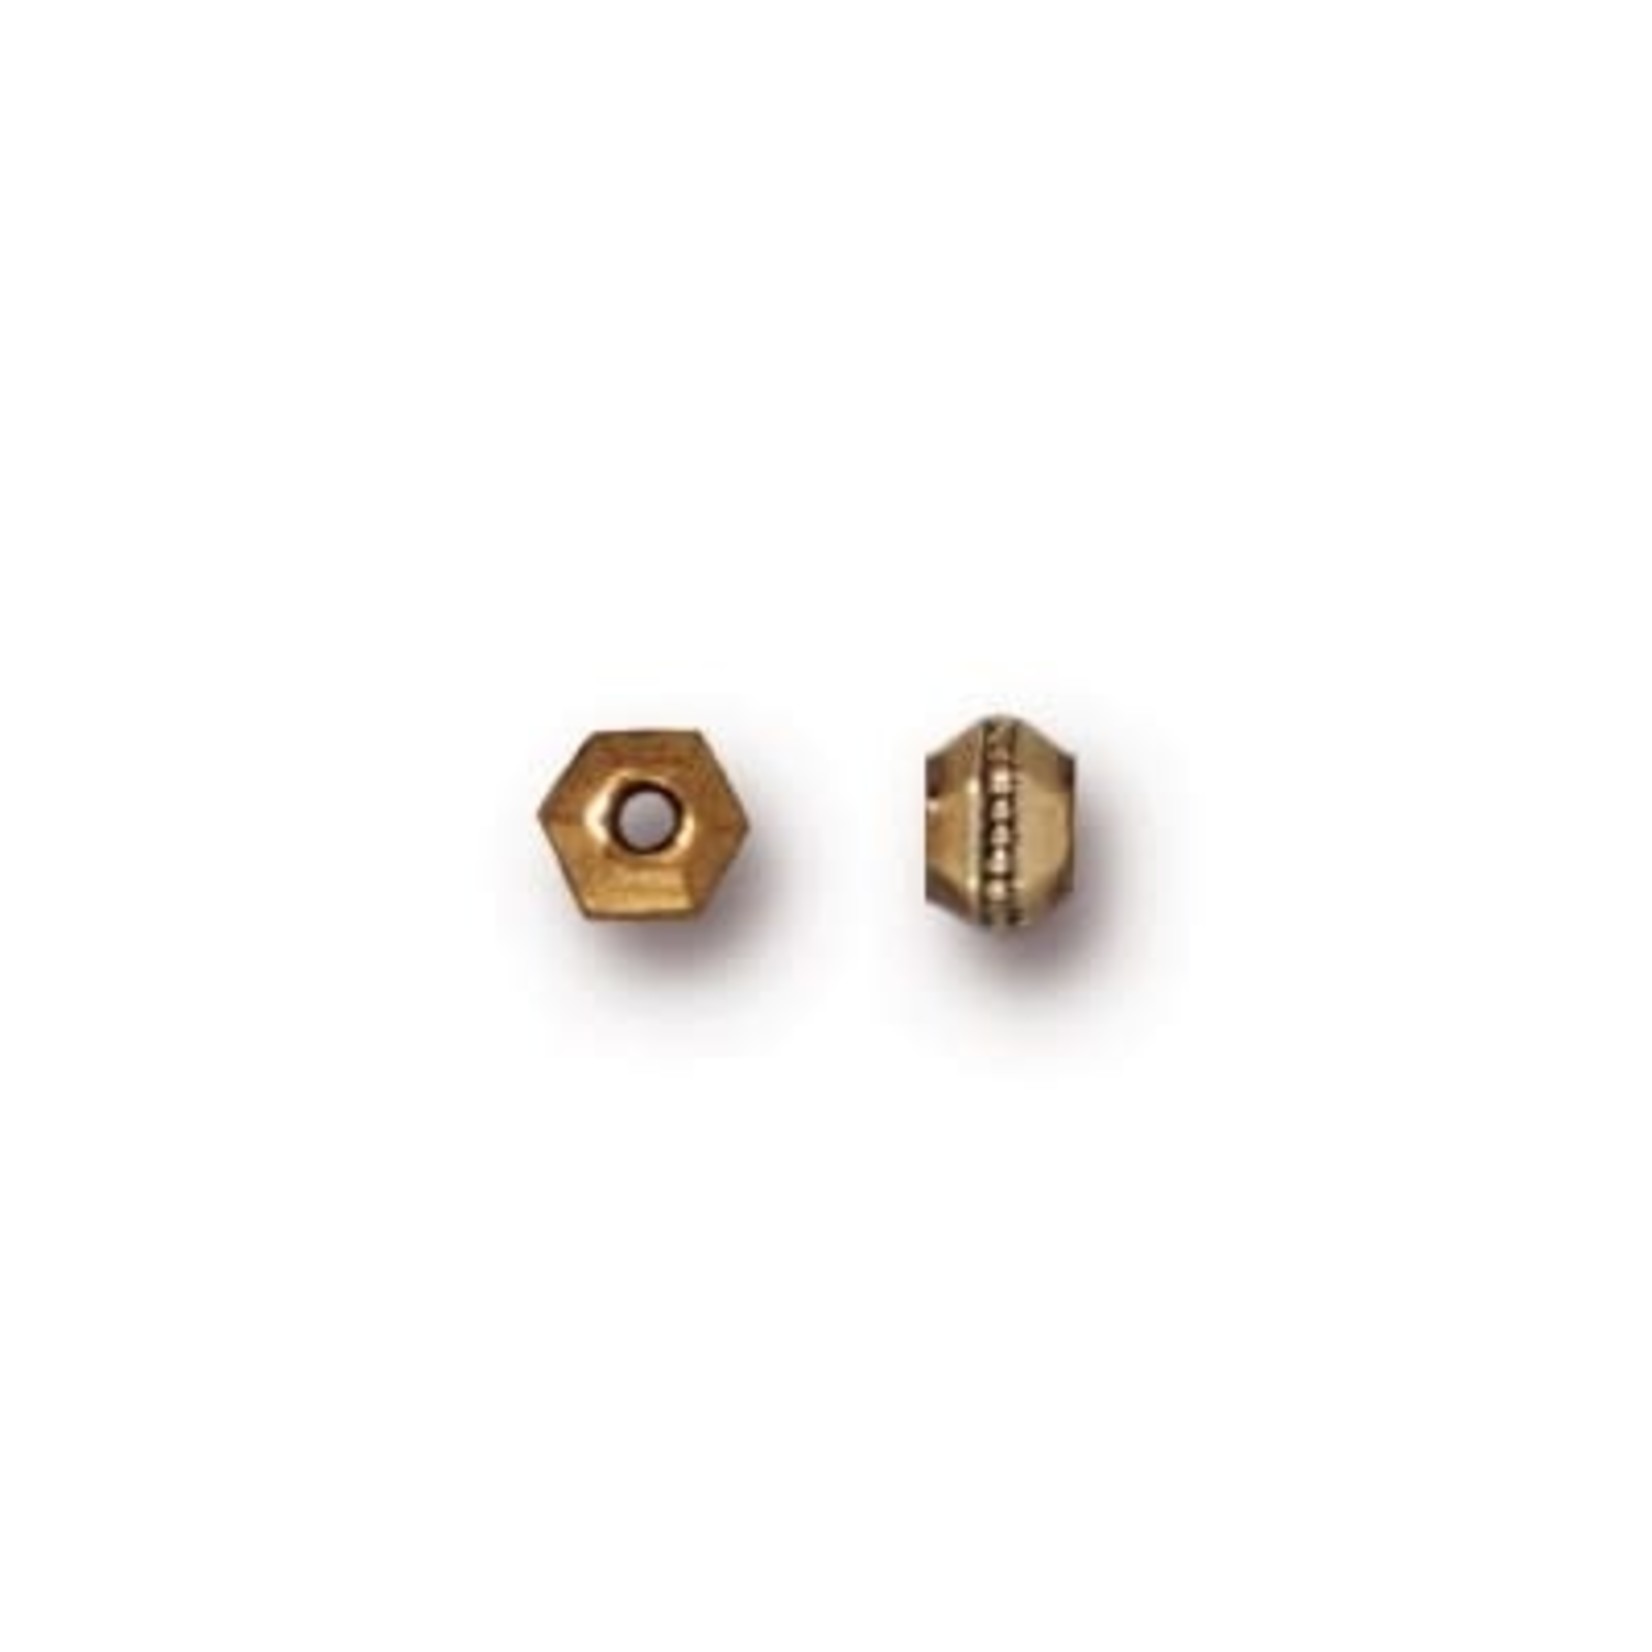 Faceted 3mm Hexagon Spacer Bead Antique Gold Plated - 100 pieces